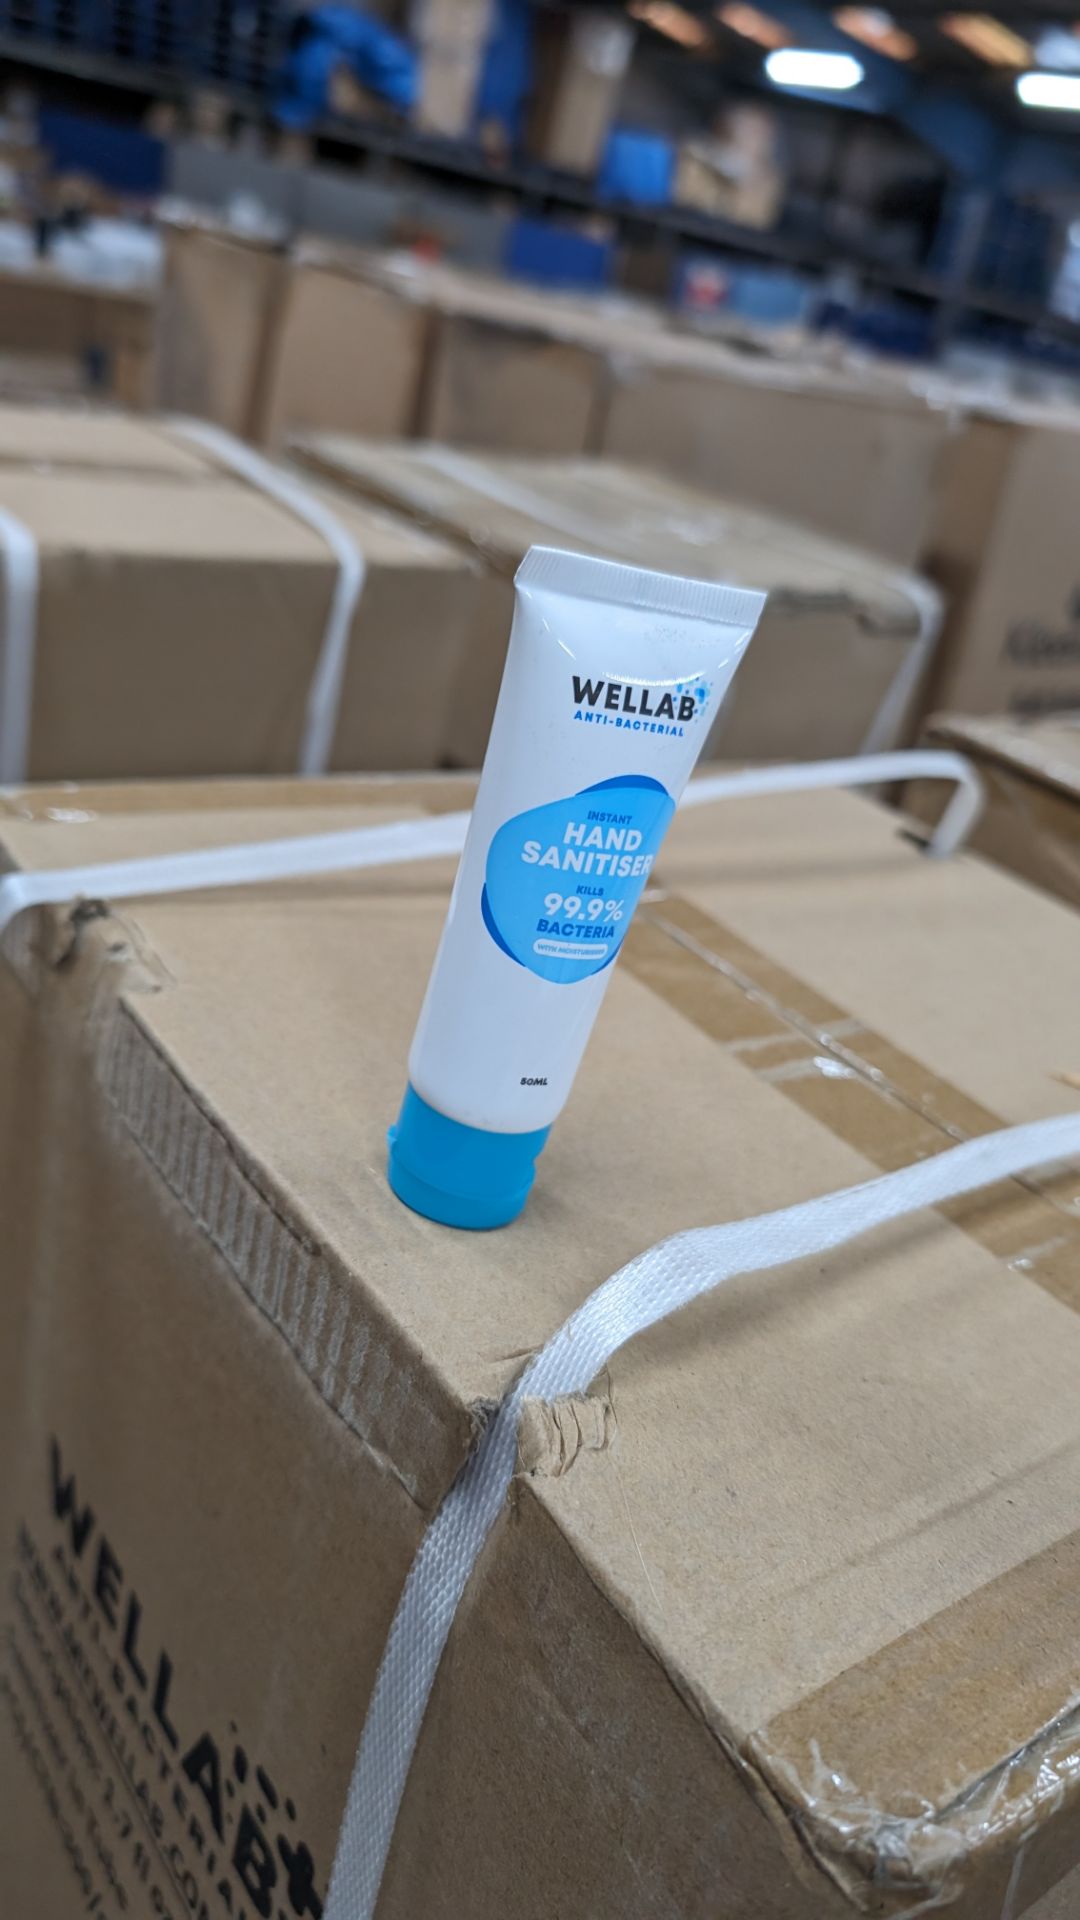 Pallet of Wellab anti-bacterial hand sanitizer with moisturiser. In 50ml tubes. Expiry April 2022. - Image 7 of 12